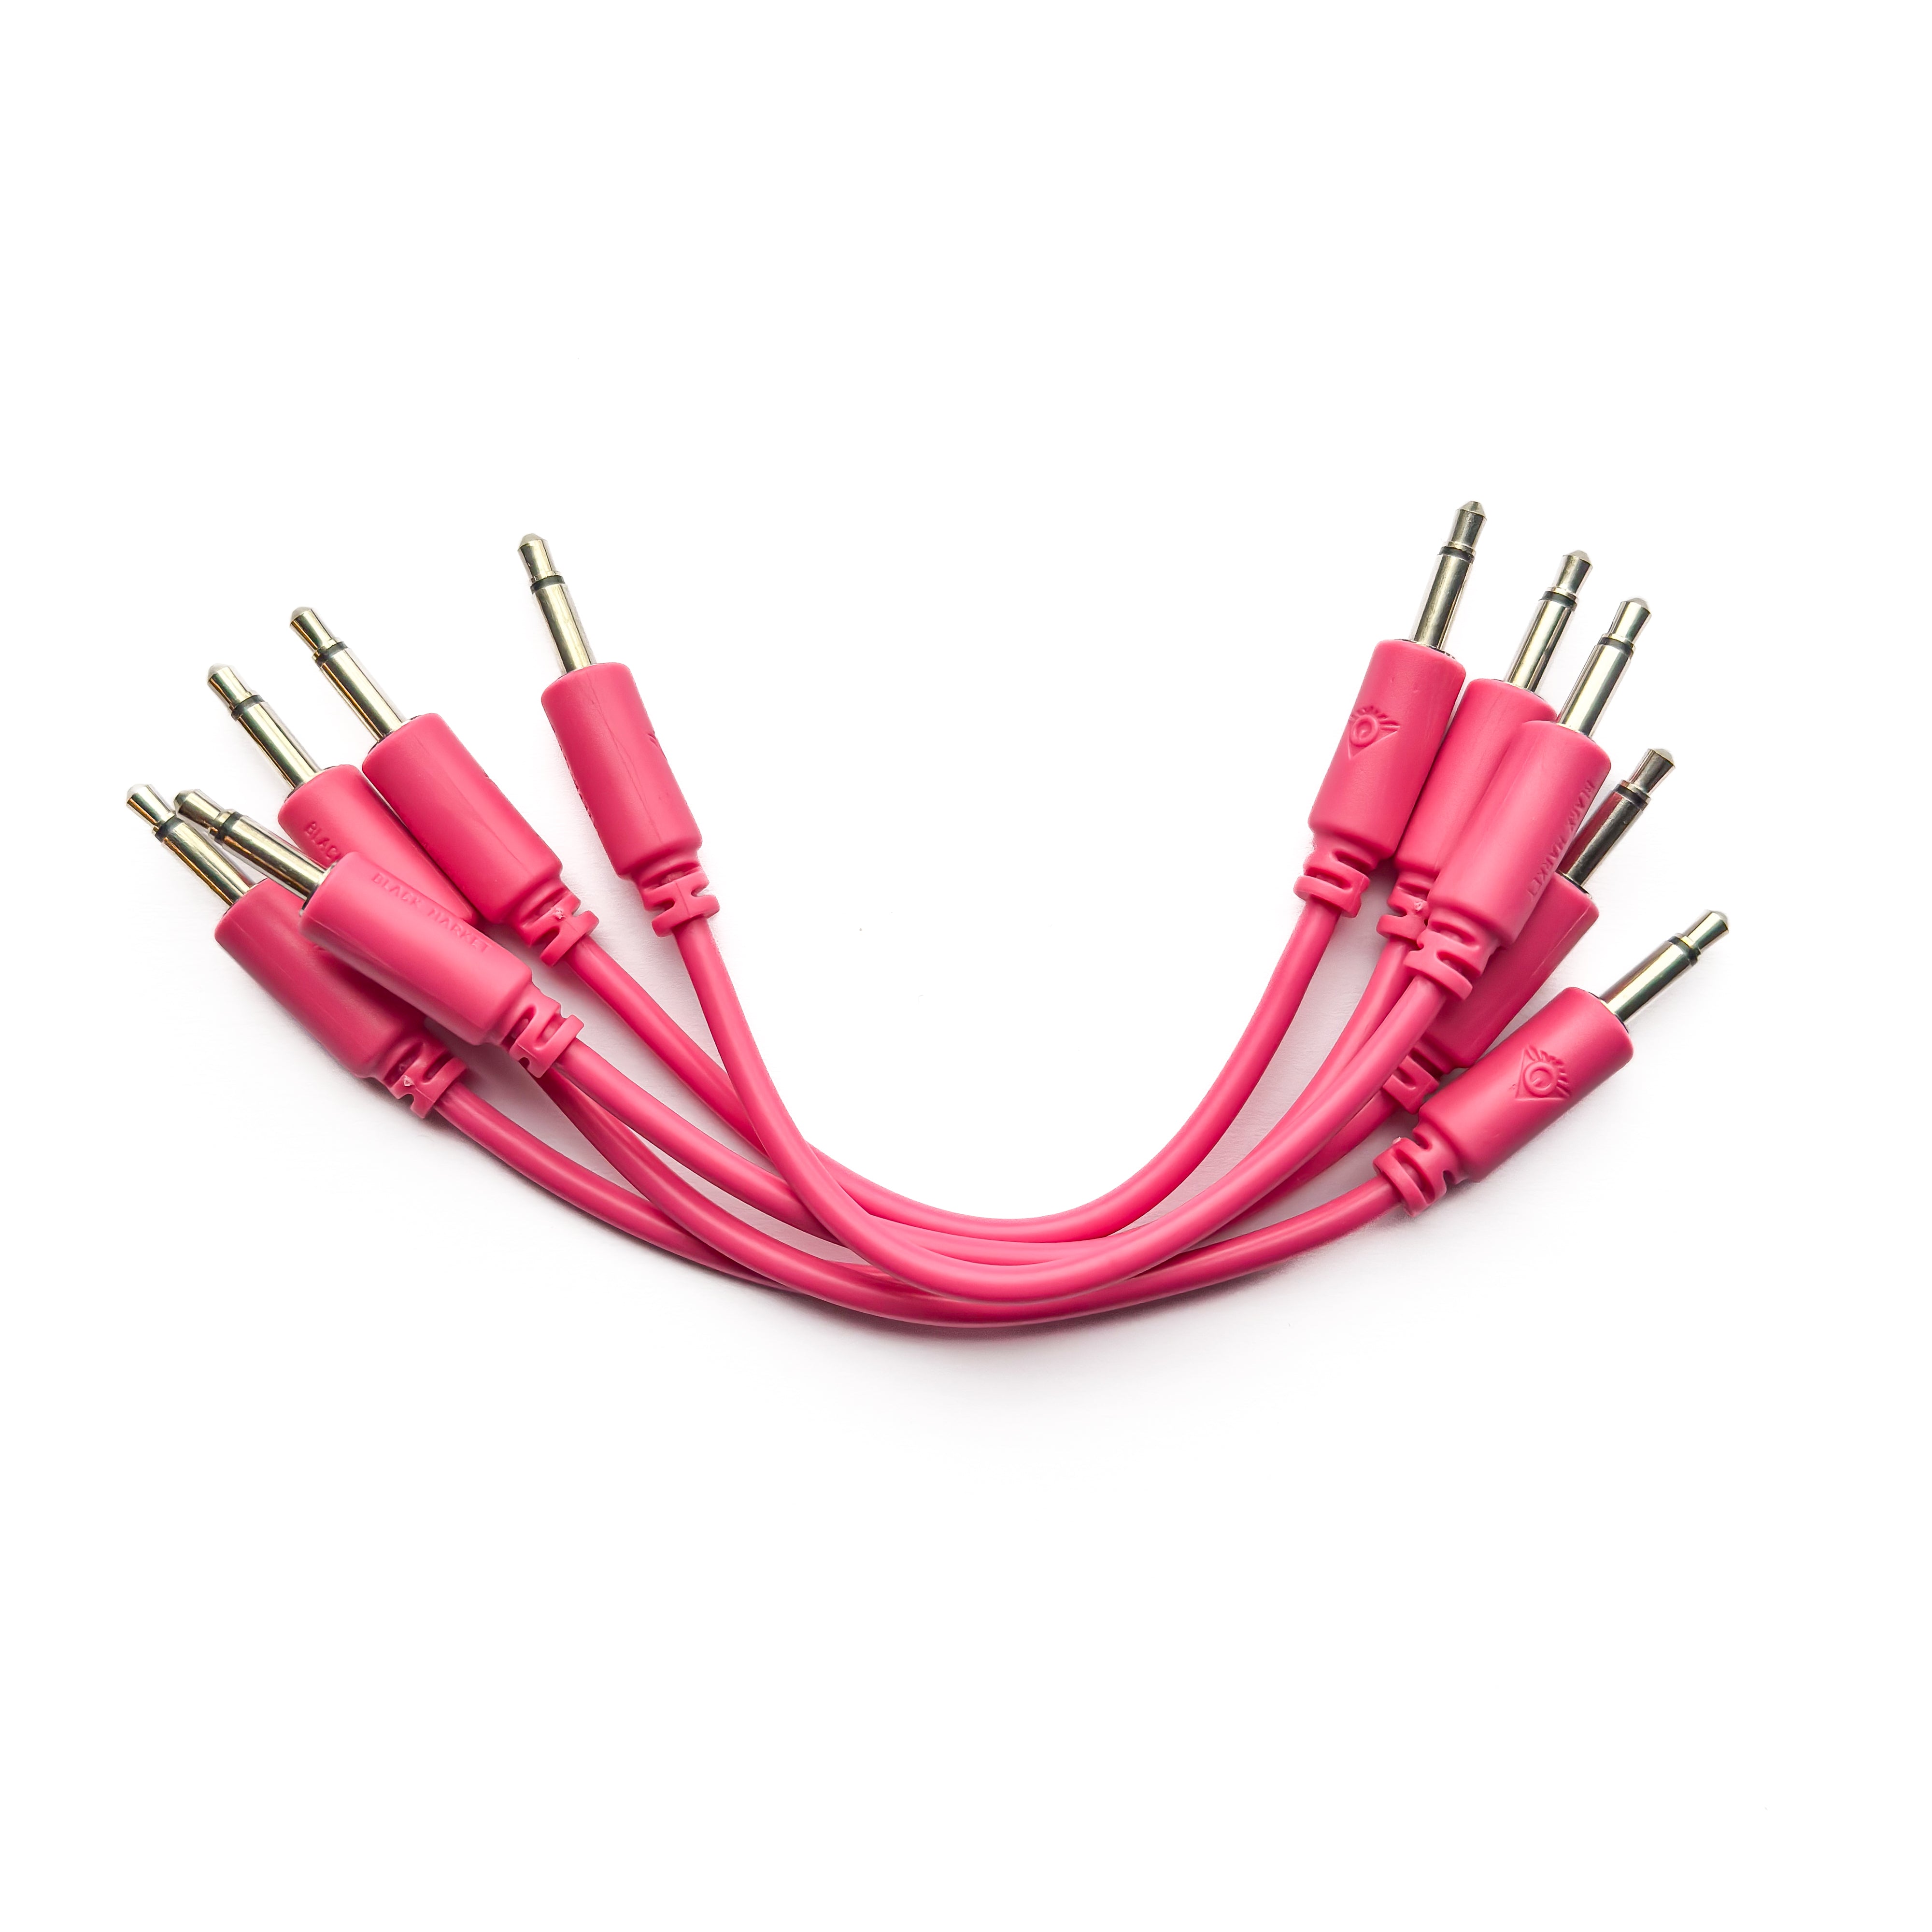 Black Market Modular 3.5mm Patch Cable 5-Pack - 9cm/3.5" - Pink View 1